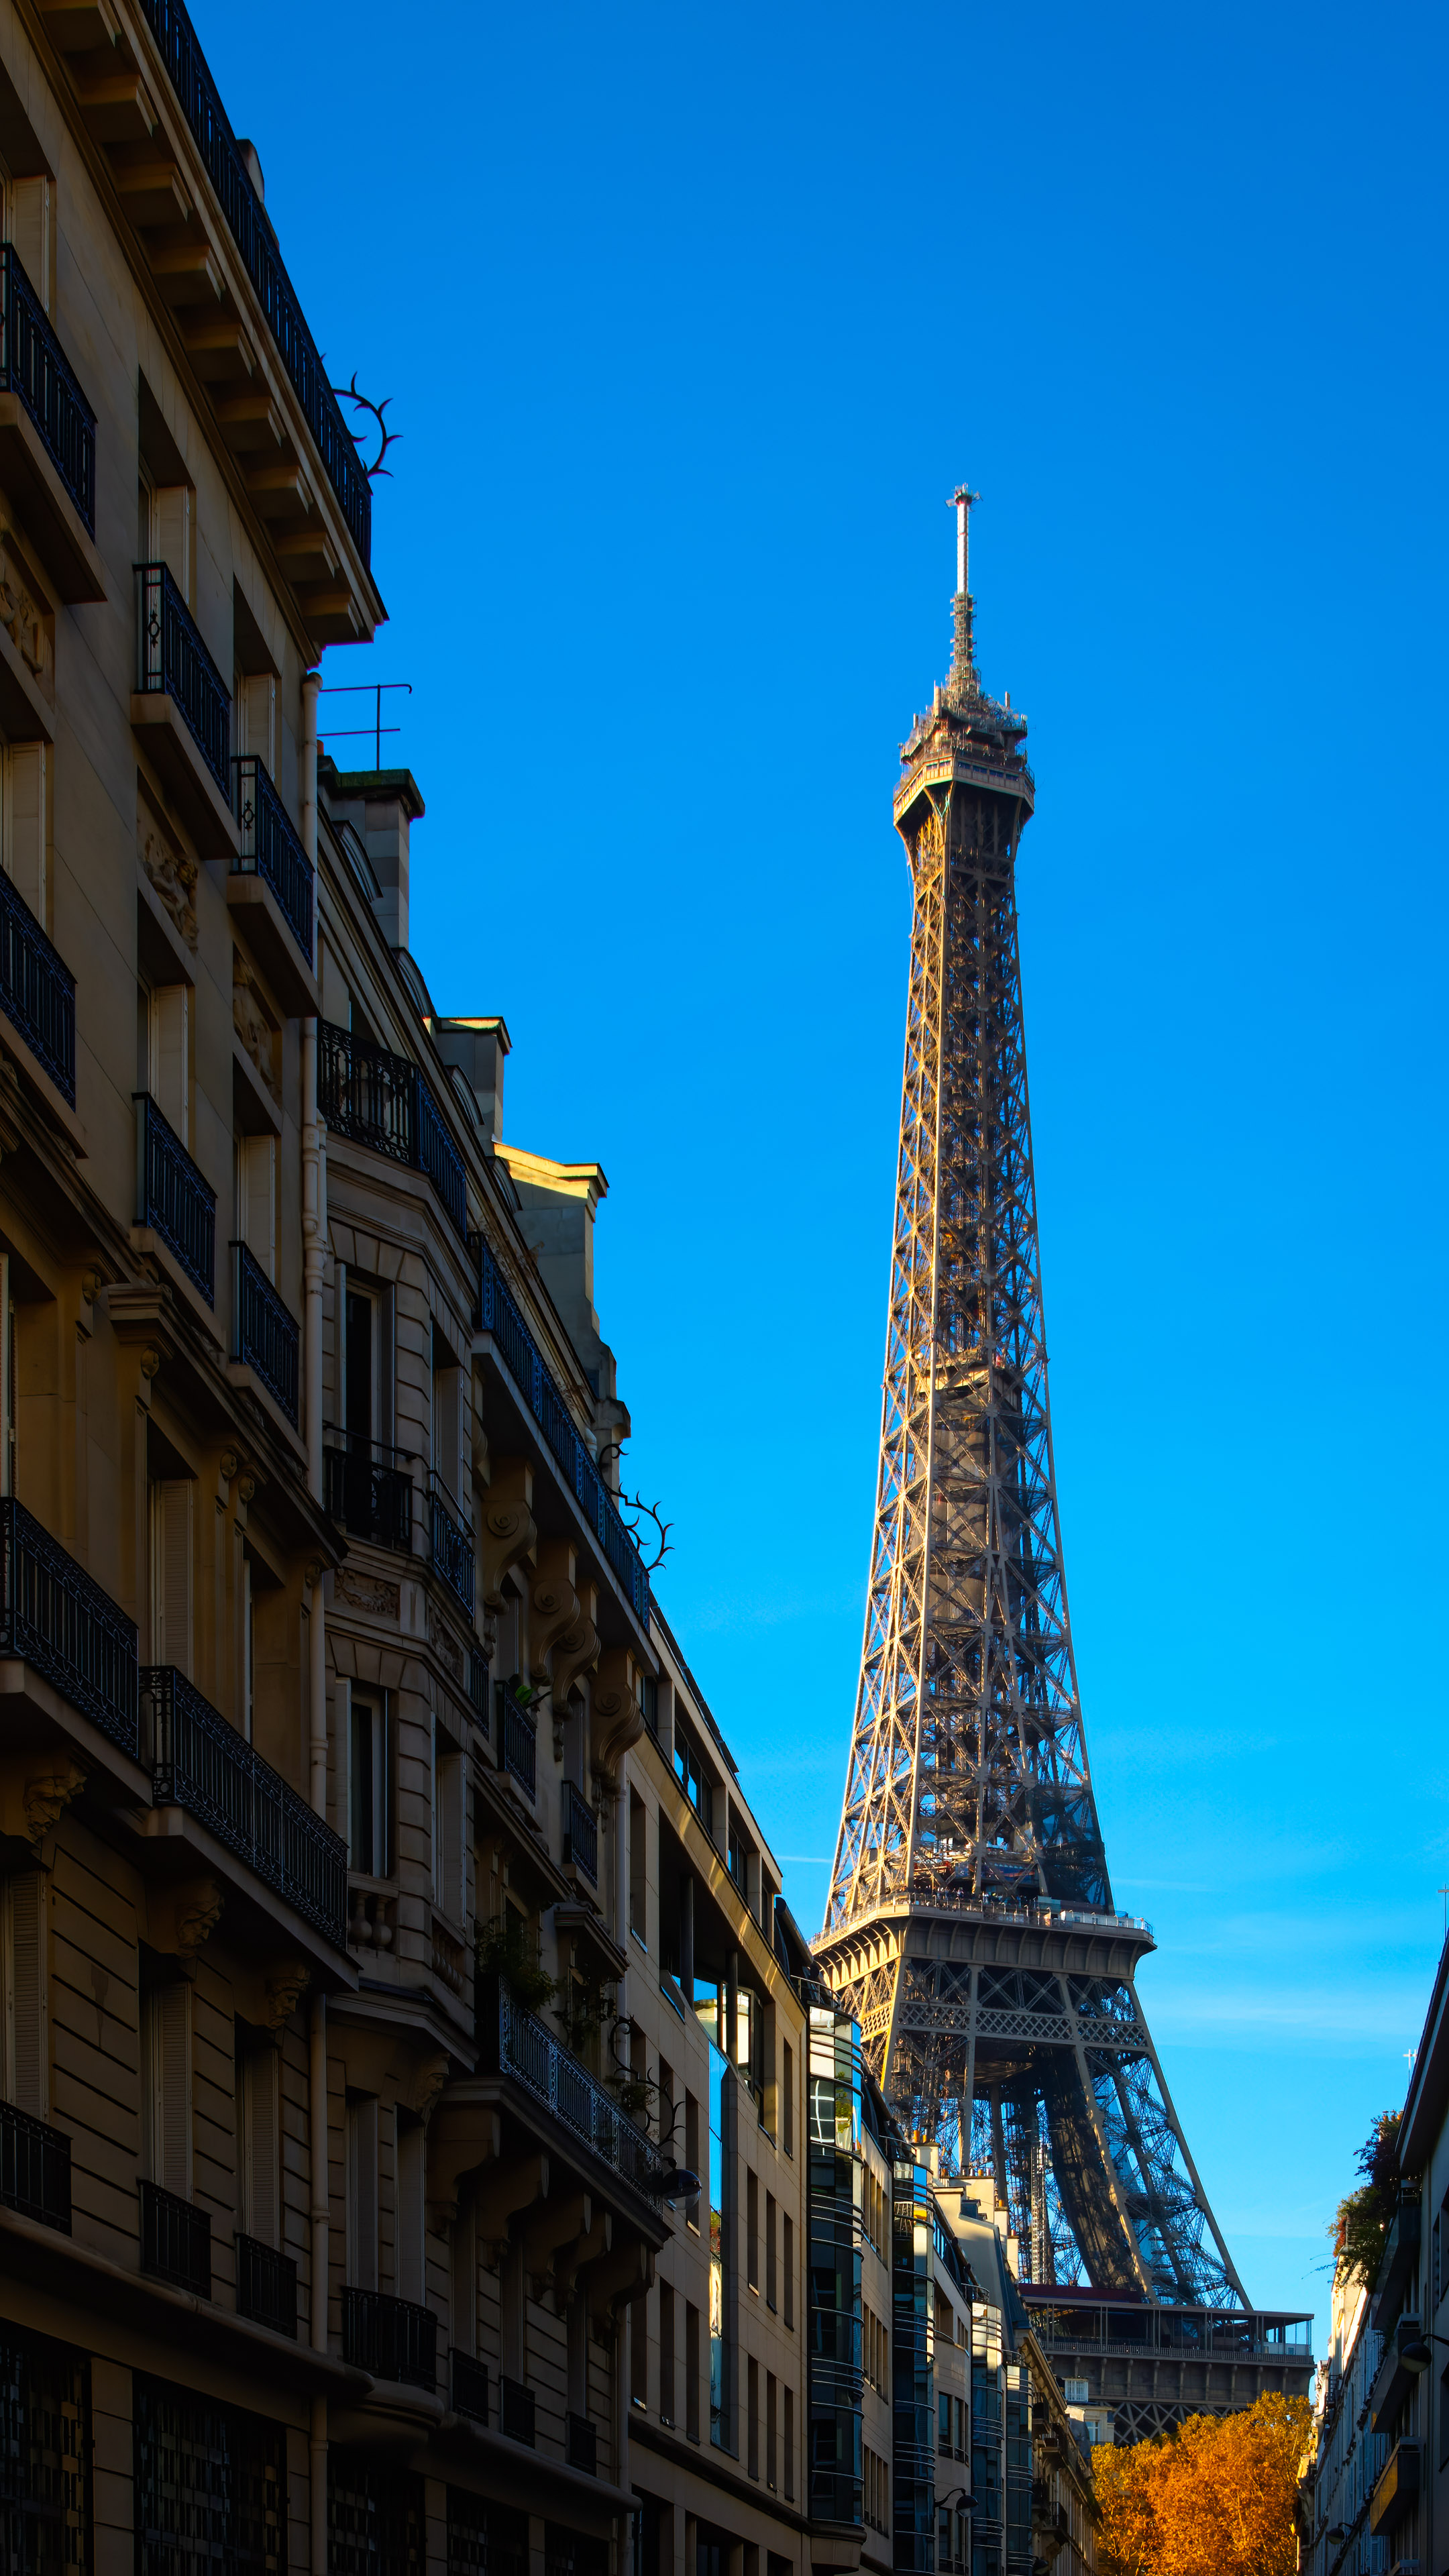 Travel to the heart of France with our phone wallpaper featuring the iconic Eiffel Tower in Paris, a symbol of elegance and romance.